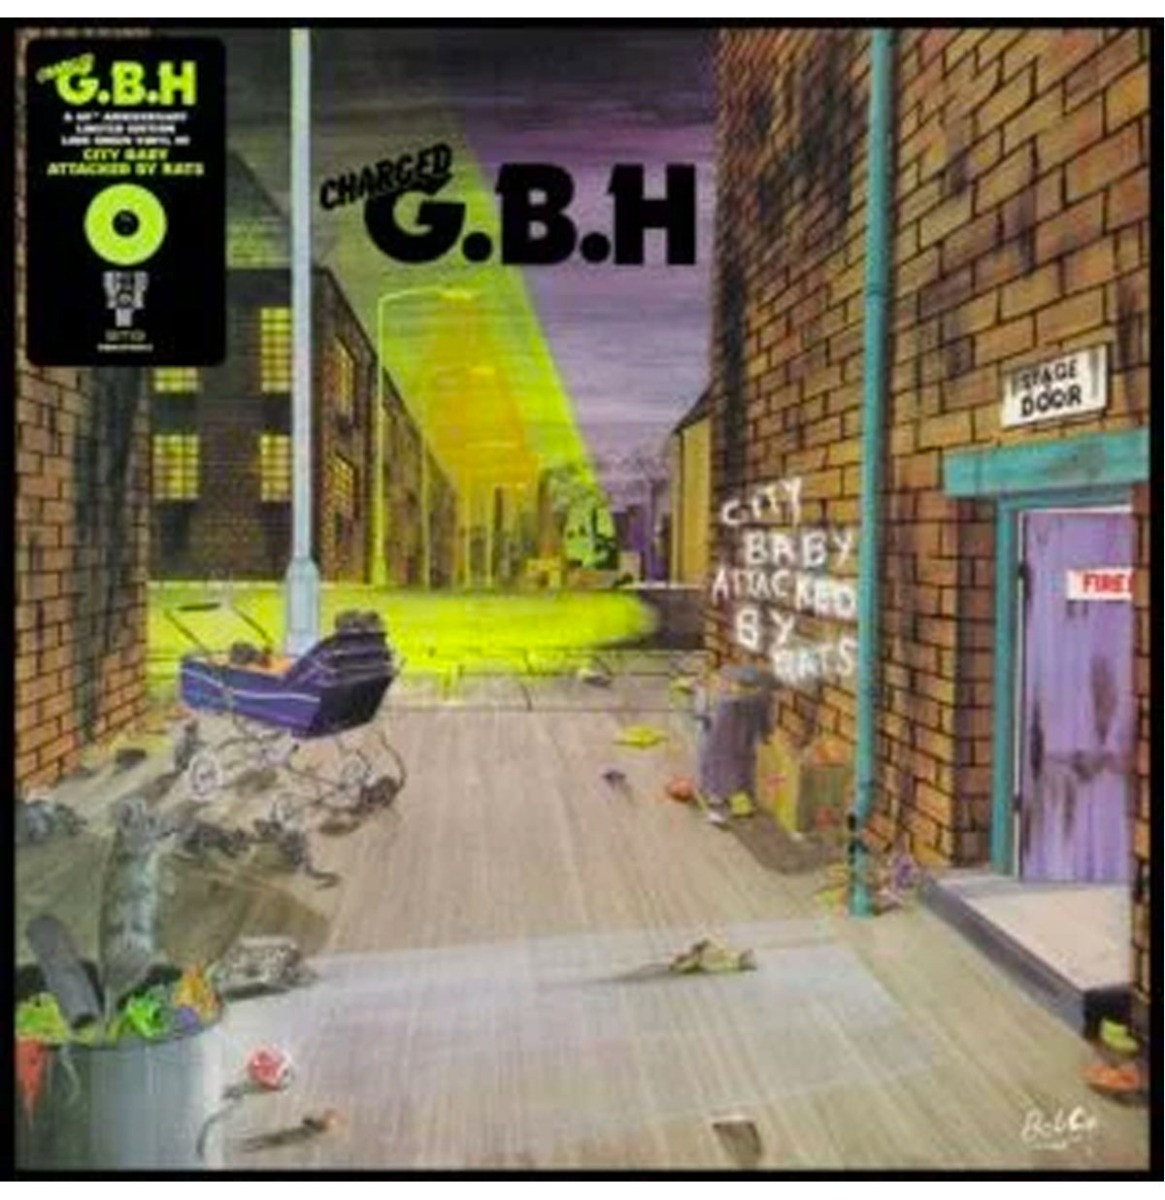 Charged G.B.H. - City Baby Attacked By Rats (Record Store Day 2022) LP